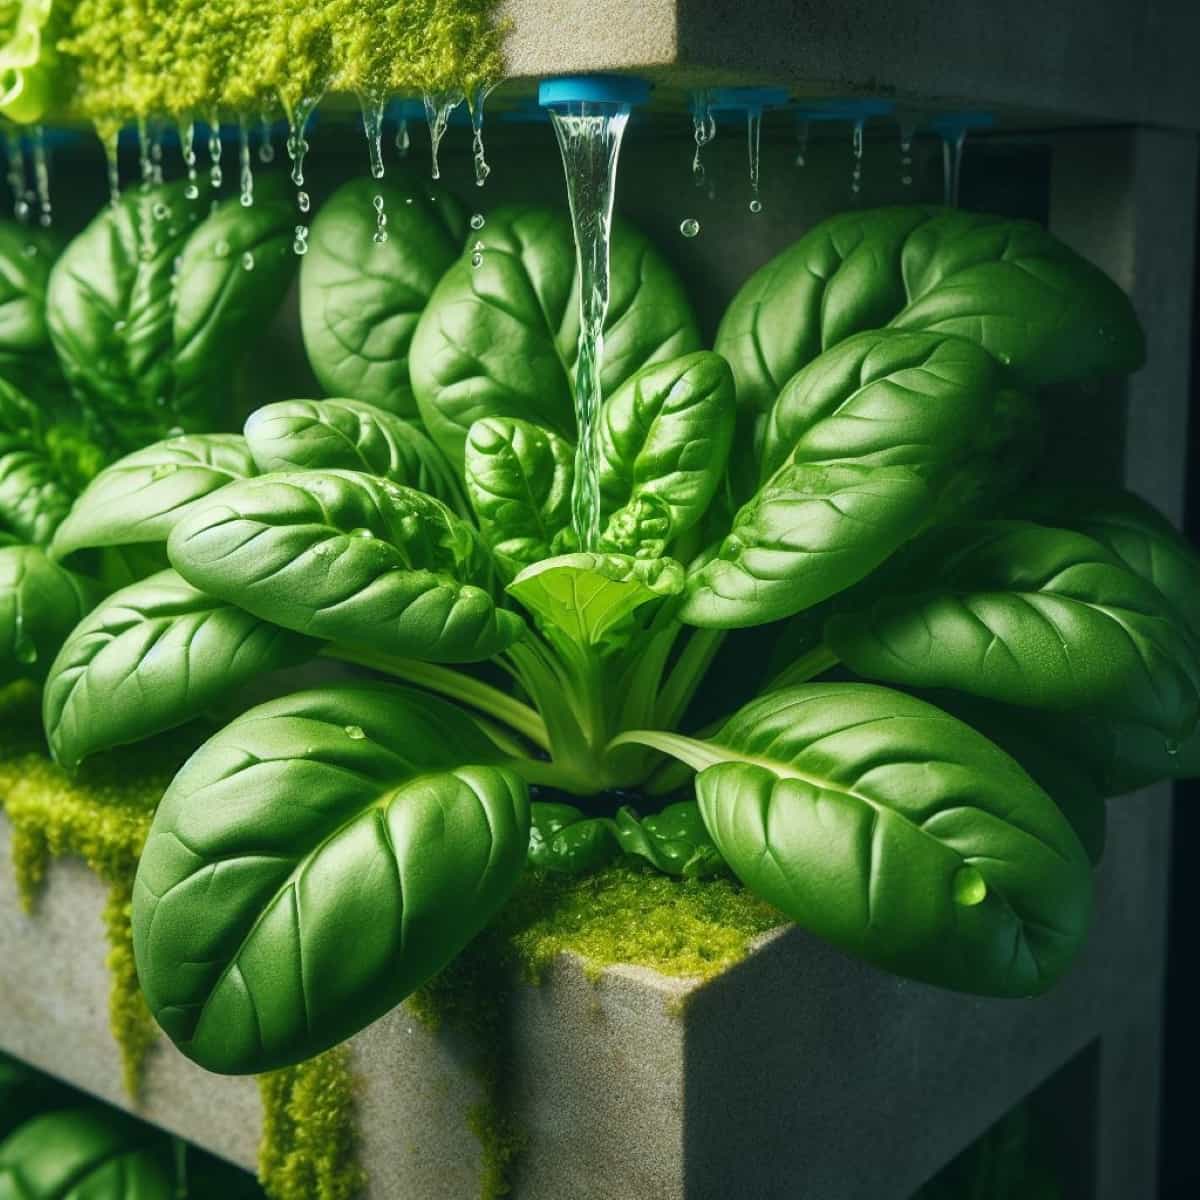 Spinach in Aquaponics
